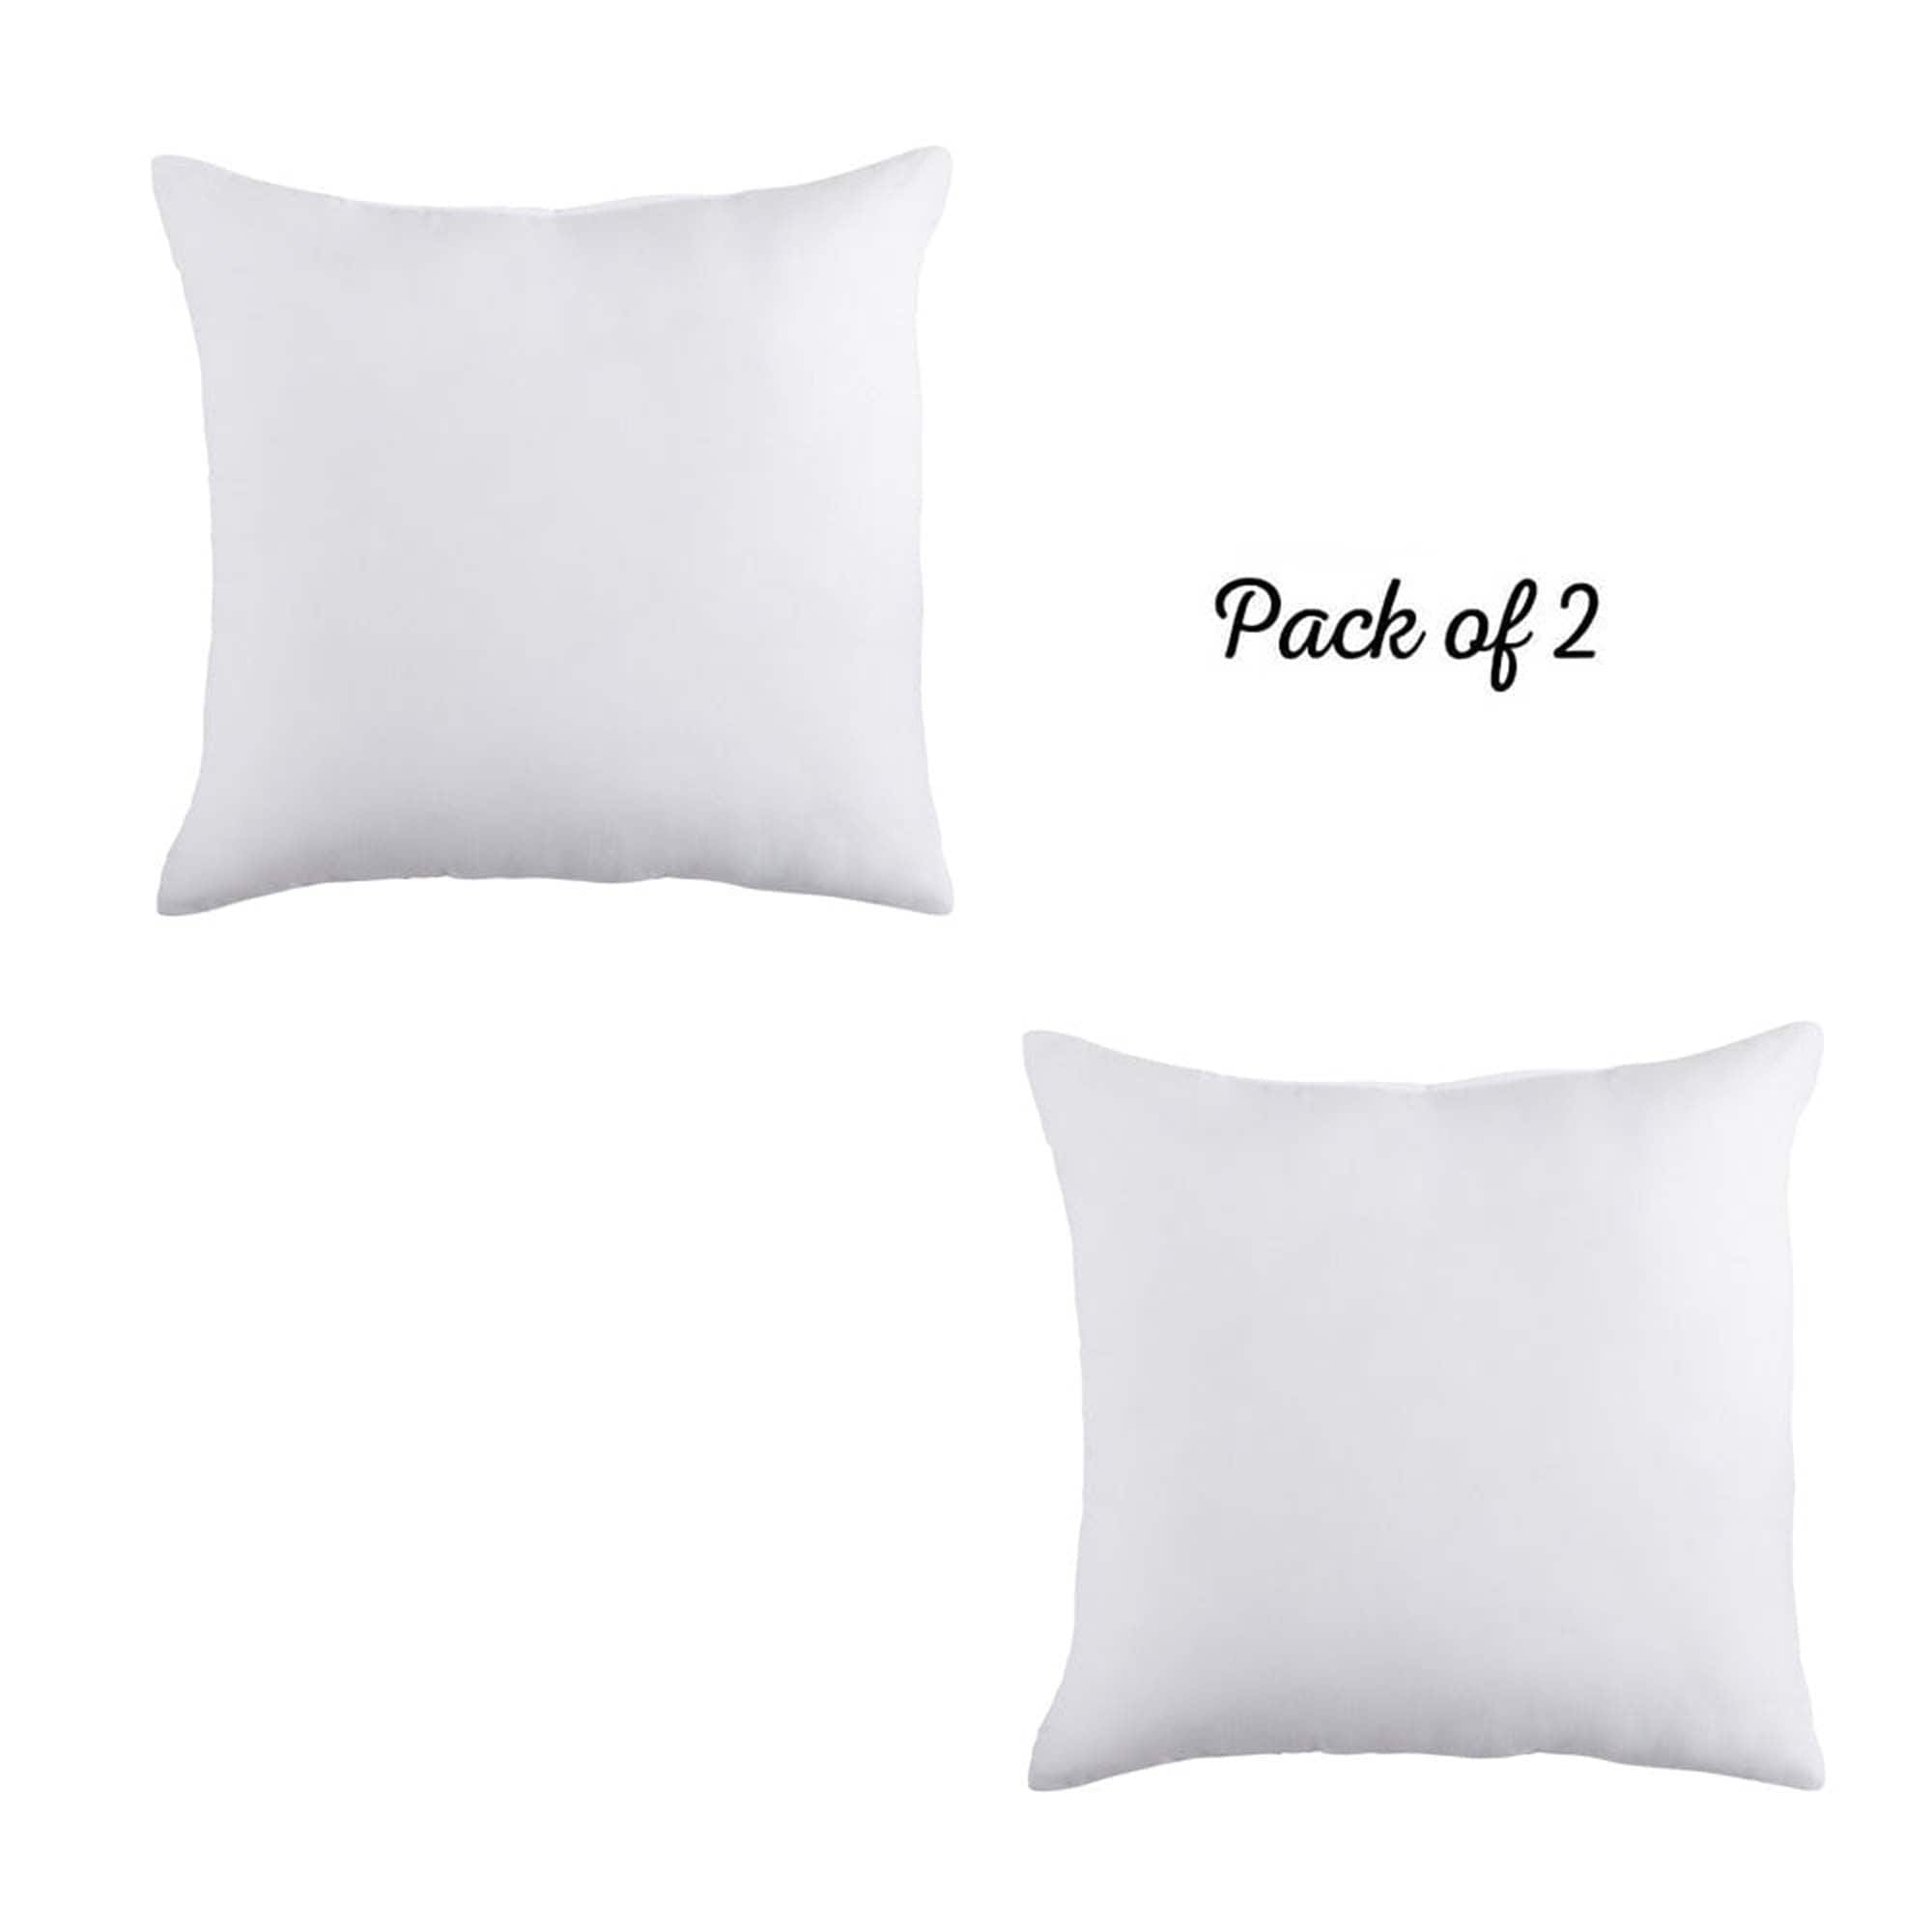 https://ak1.ostkcdn.com/images/products/is/images/direct/ffc0f3f139a981b82c35c4dad956ee6f9c6cc72b/Eco-Friendly-Set-of-2-Throw-Pillow-Insert-with-Recycled-Poly-Filling.jpg